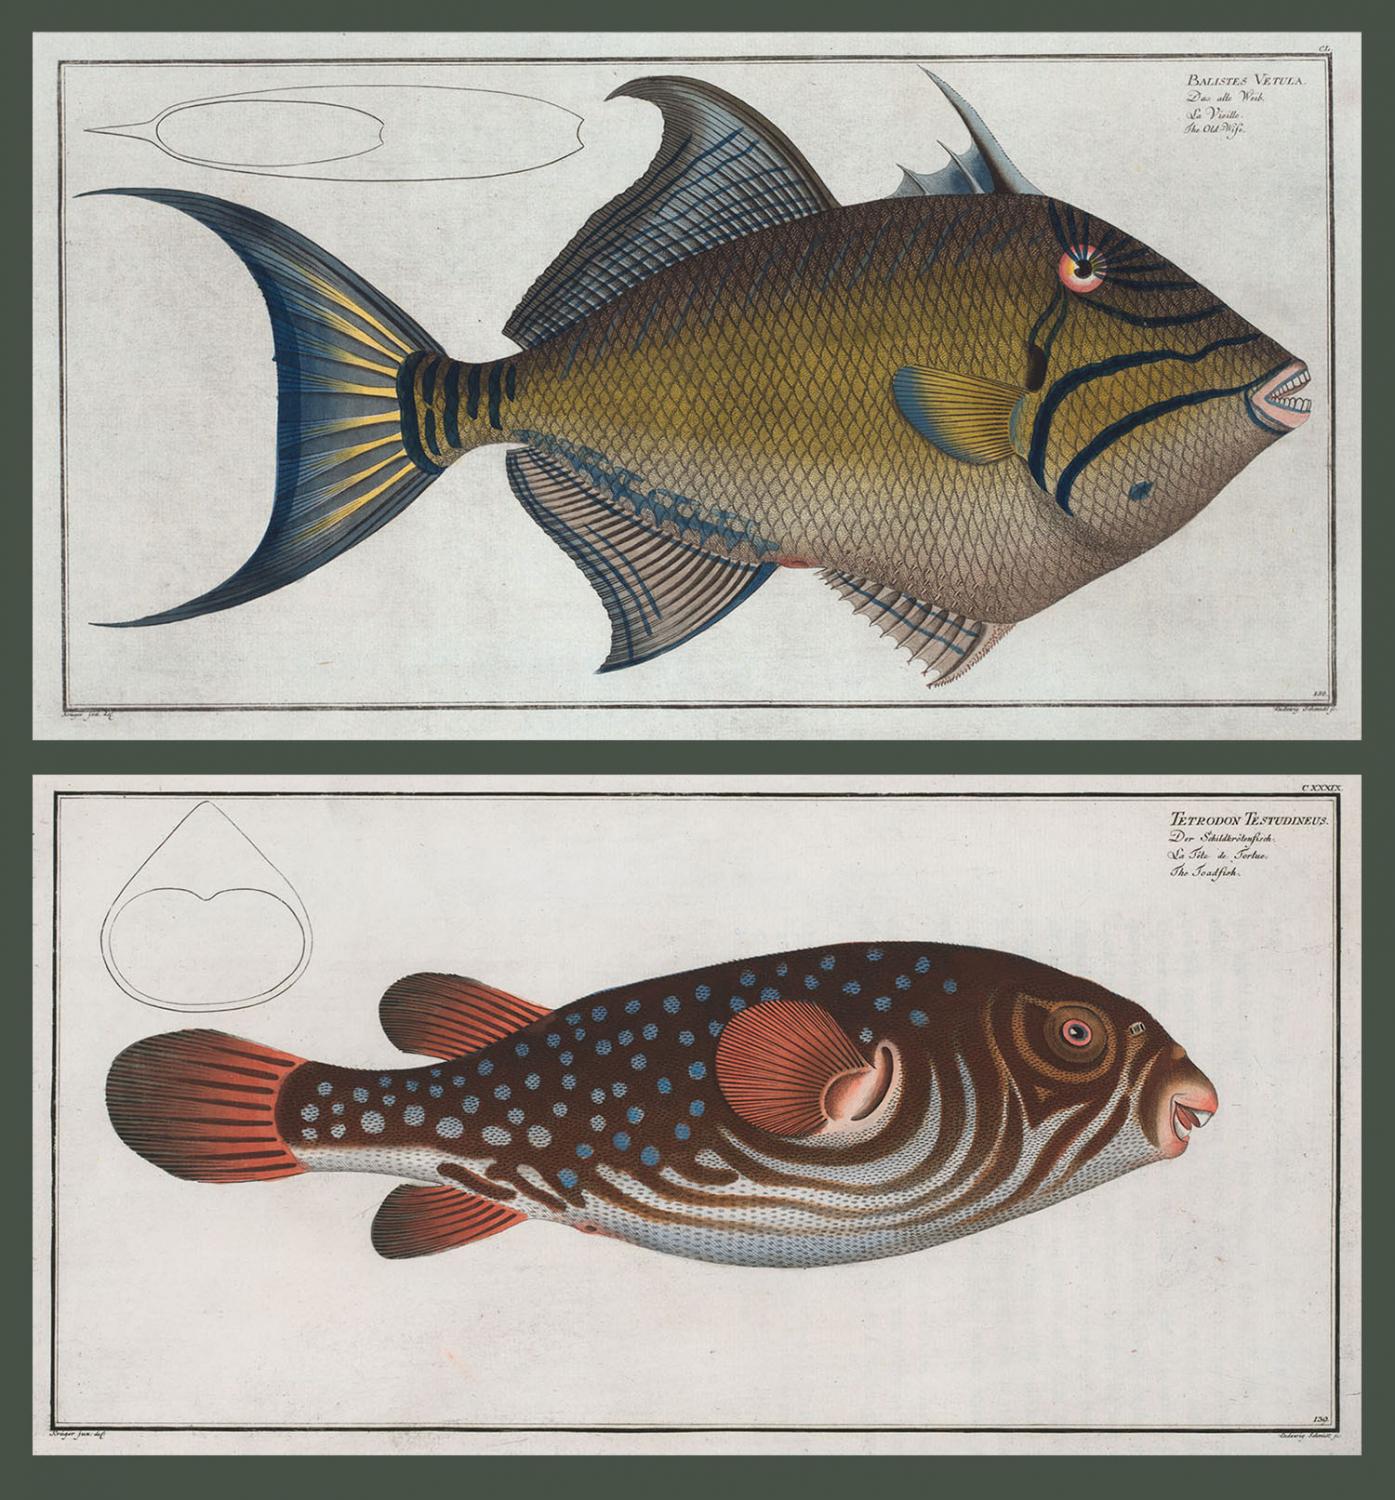 Top: Batiste's Vetula, The Old-Wife  Bottom: Tetrodon Testudineus, the Toadfish. (Courtesy Rare Book Division, The New York Public Library Digital Collections.) 